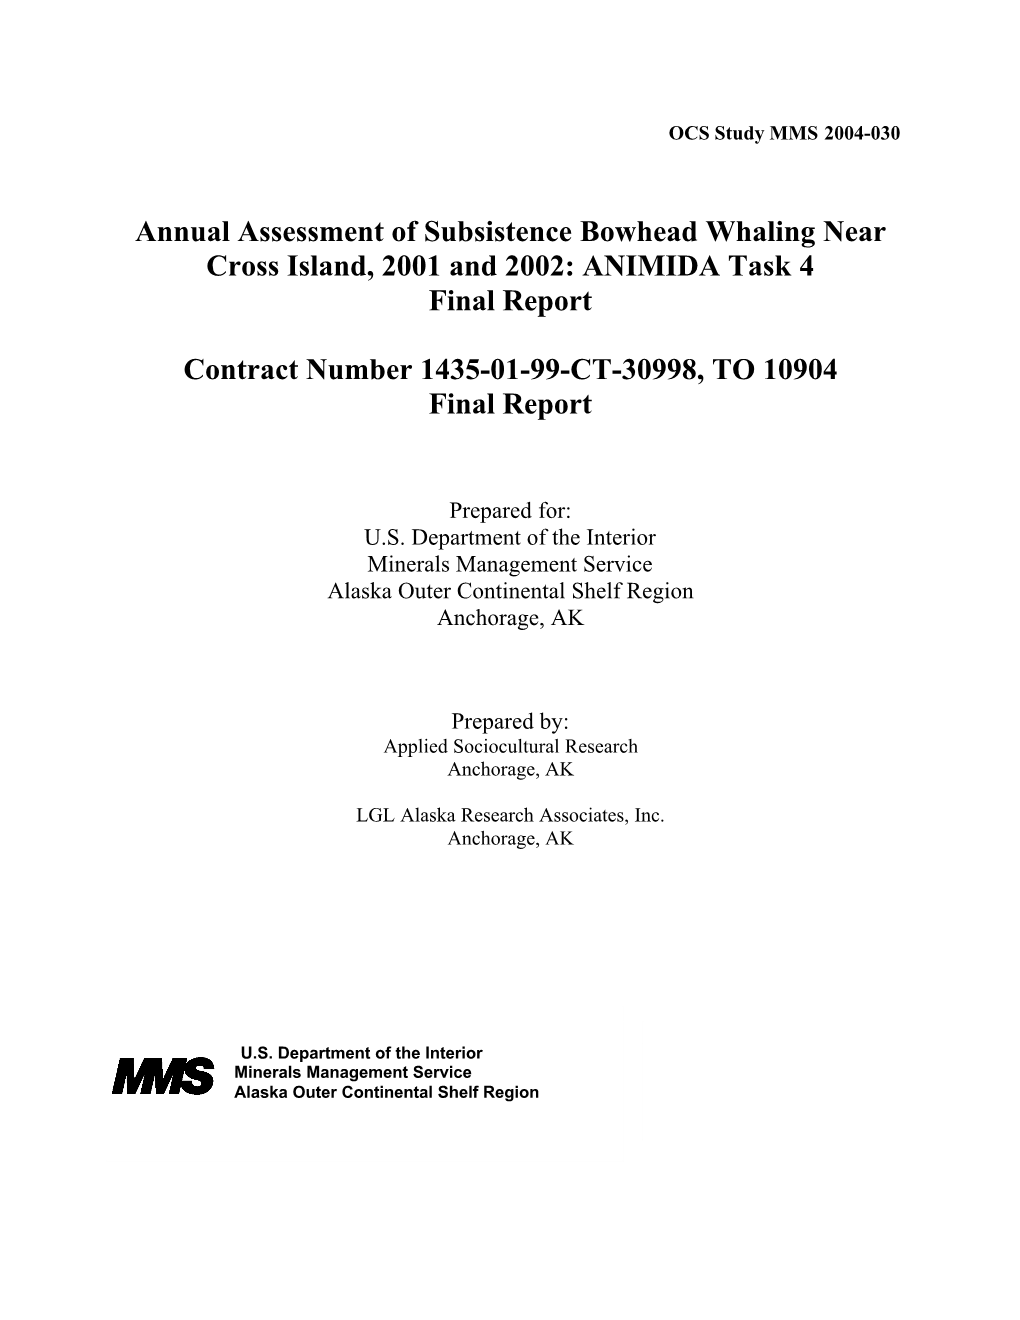 Annual Assessment of Subsistence Bowhead Whaling Near Cross Island, 2001 and 2002: ANIMIDA Task 4 Final Report